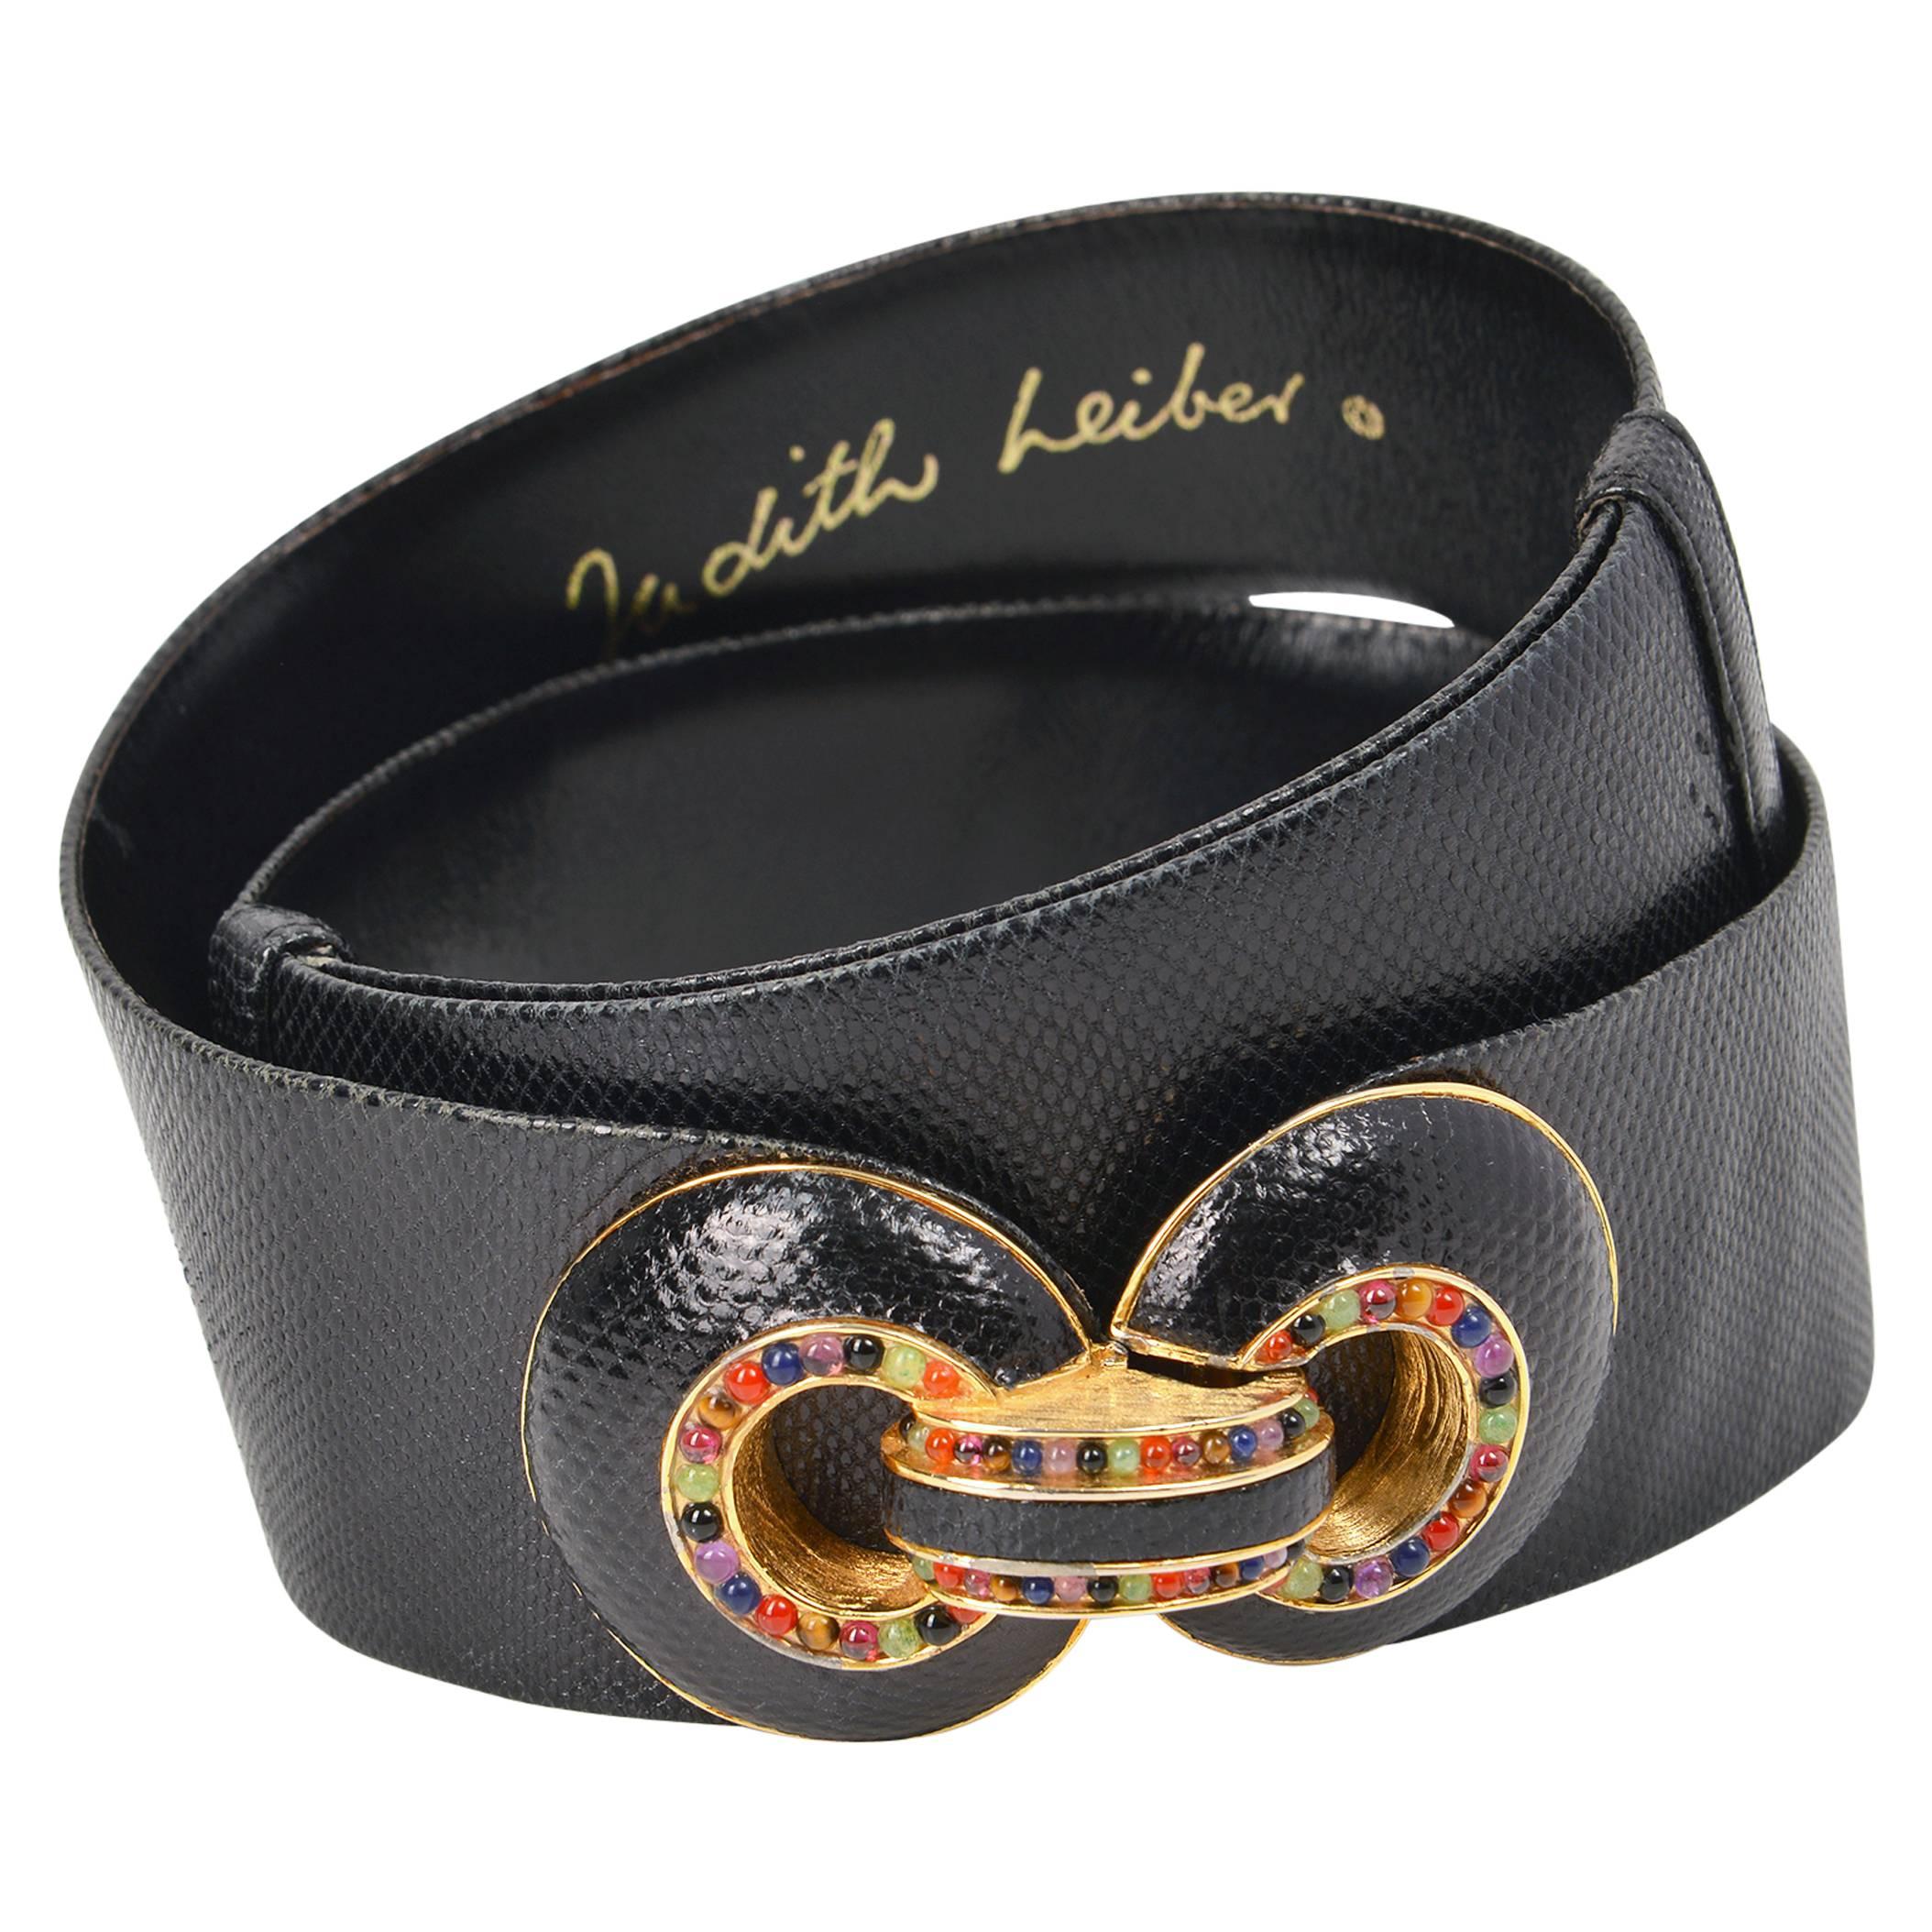 Judith Leiber Embossed Black Leather Belt with Jeweled Buckle For Sale